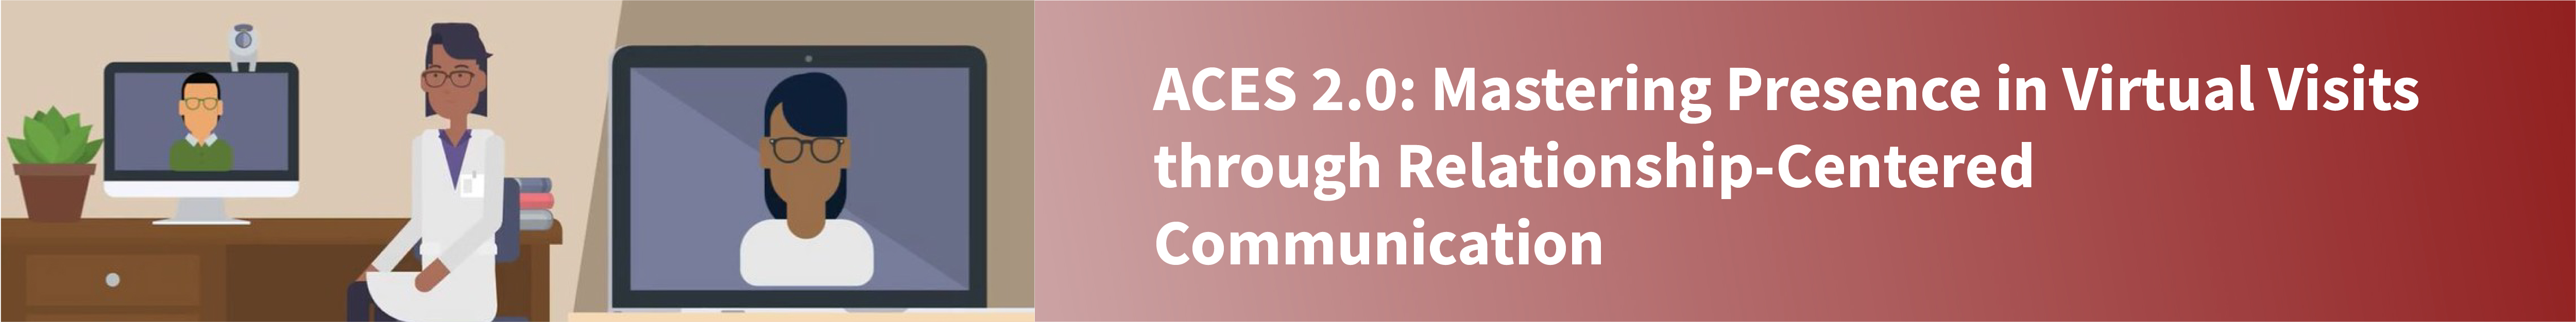 Mastering Presence in Virtual Visits through Relationship-Centered Communication (ACES 2.0) Banner